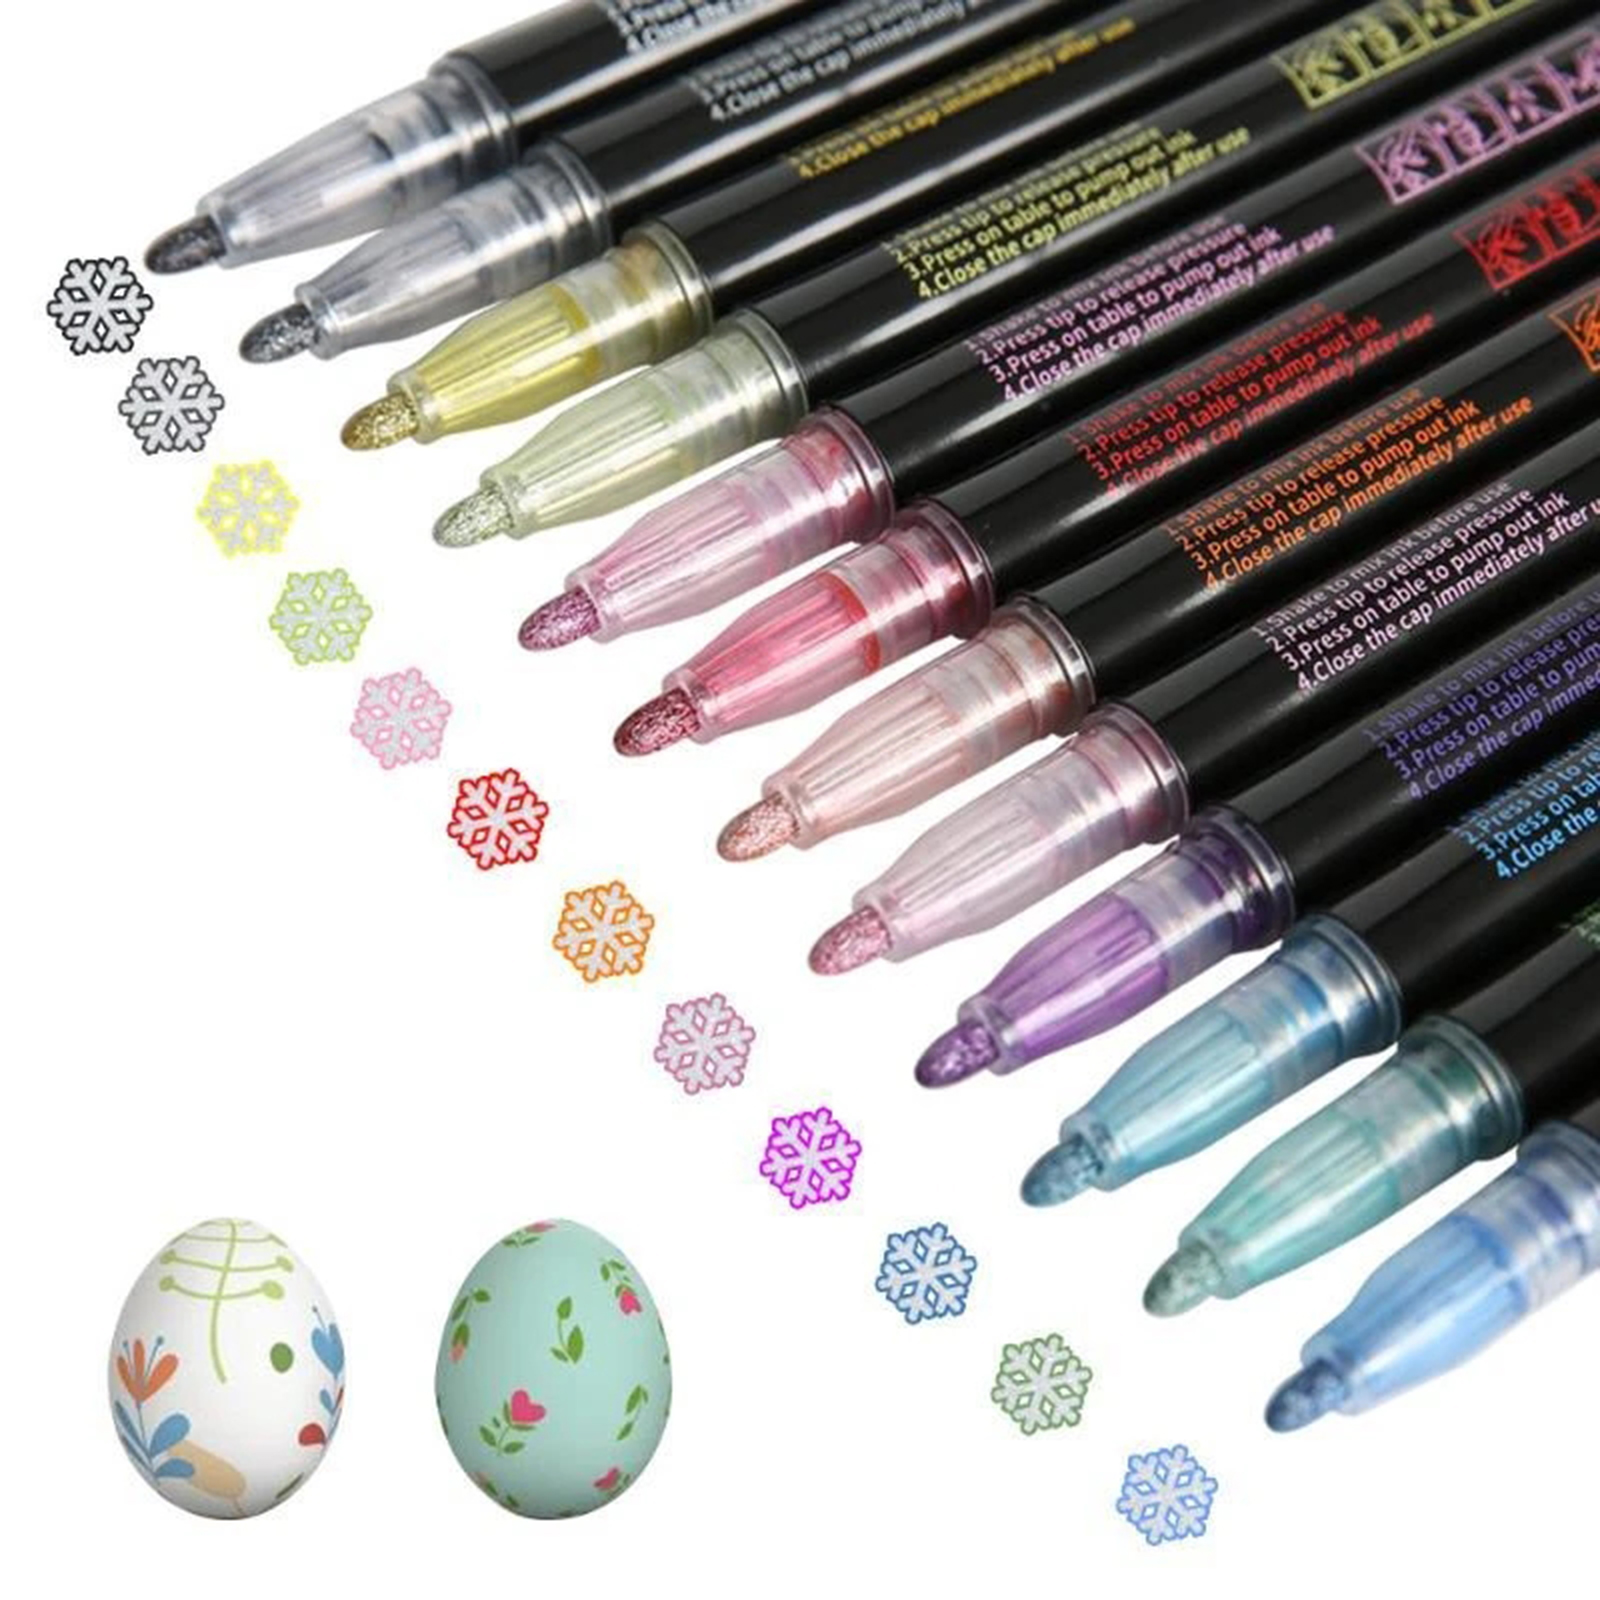 8/12pcs Marker Pen for Highlight Writing Taking Notes Drawing DIY Art Projects Kids Adult SUB Sale